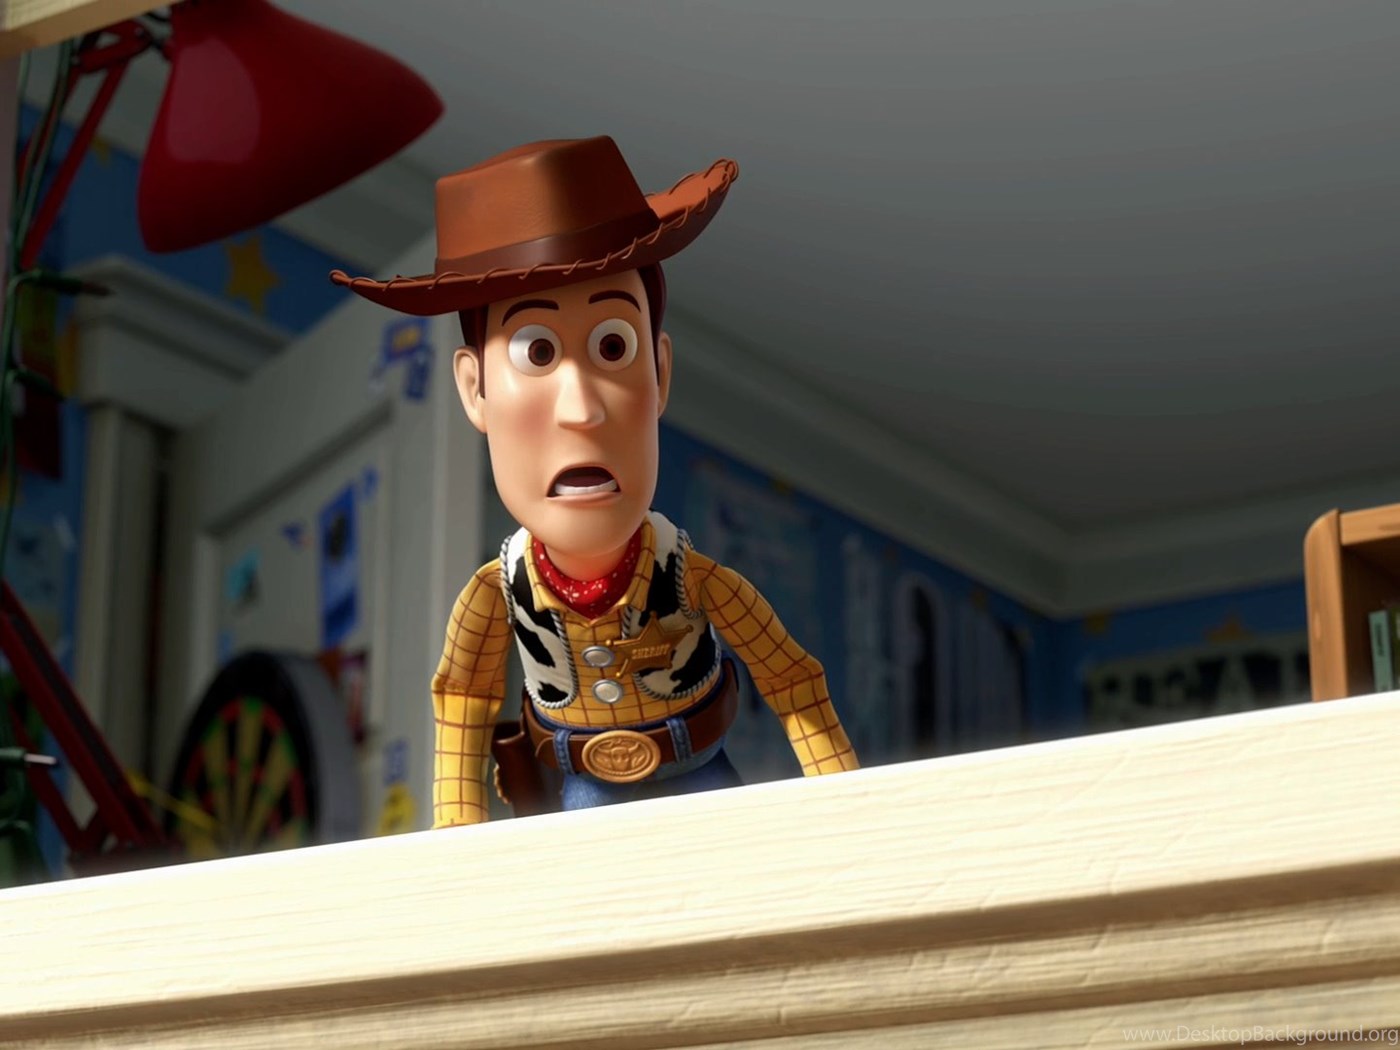 Download Tables Lamps Toy Story Woody Hats Fullscreen Standart 4:3 1400x105...